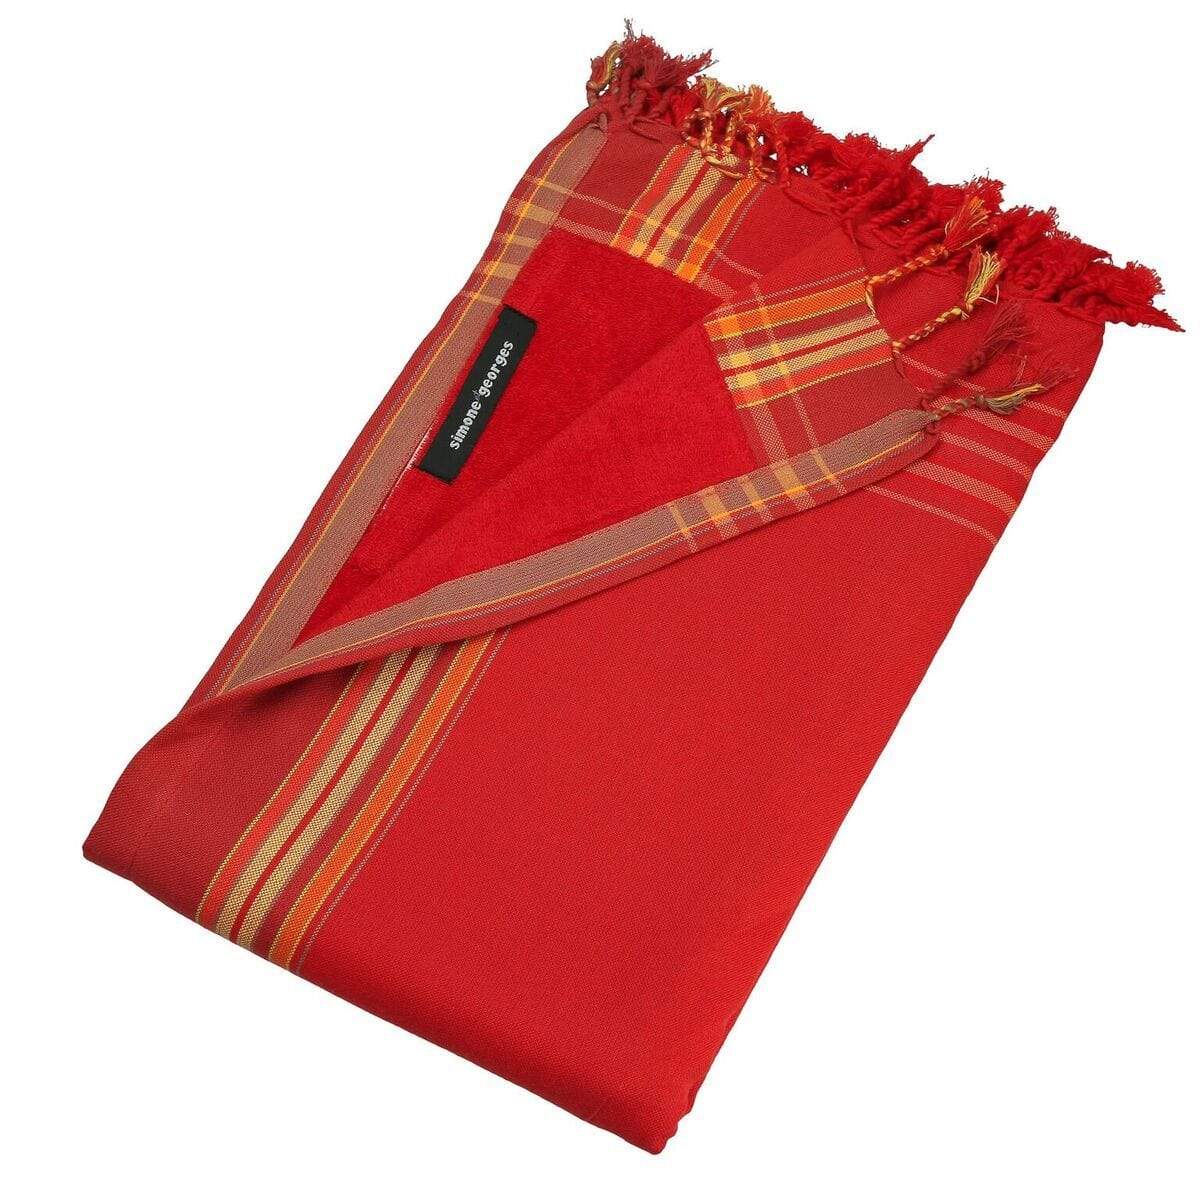 HomeRoots Outdoors Home Decor > Throws Red / Cotton, Towel, Polyester 0.82" X 1.31" X 0.07" Rio Grande Cotton, Polyester Kikoy-Towel